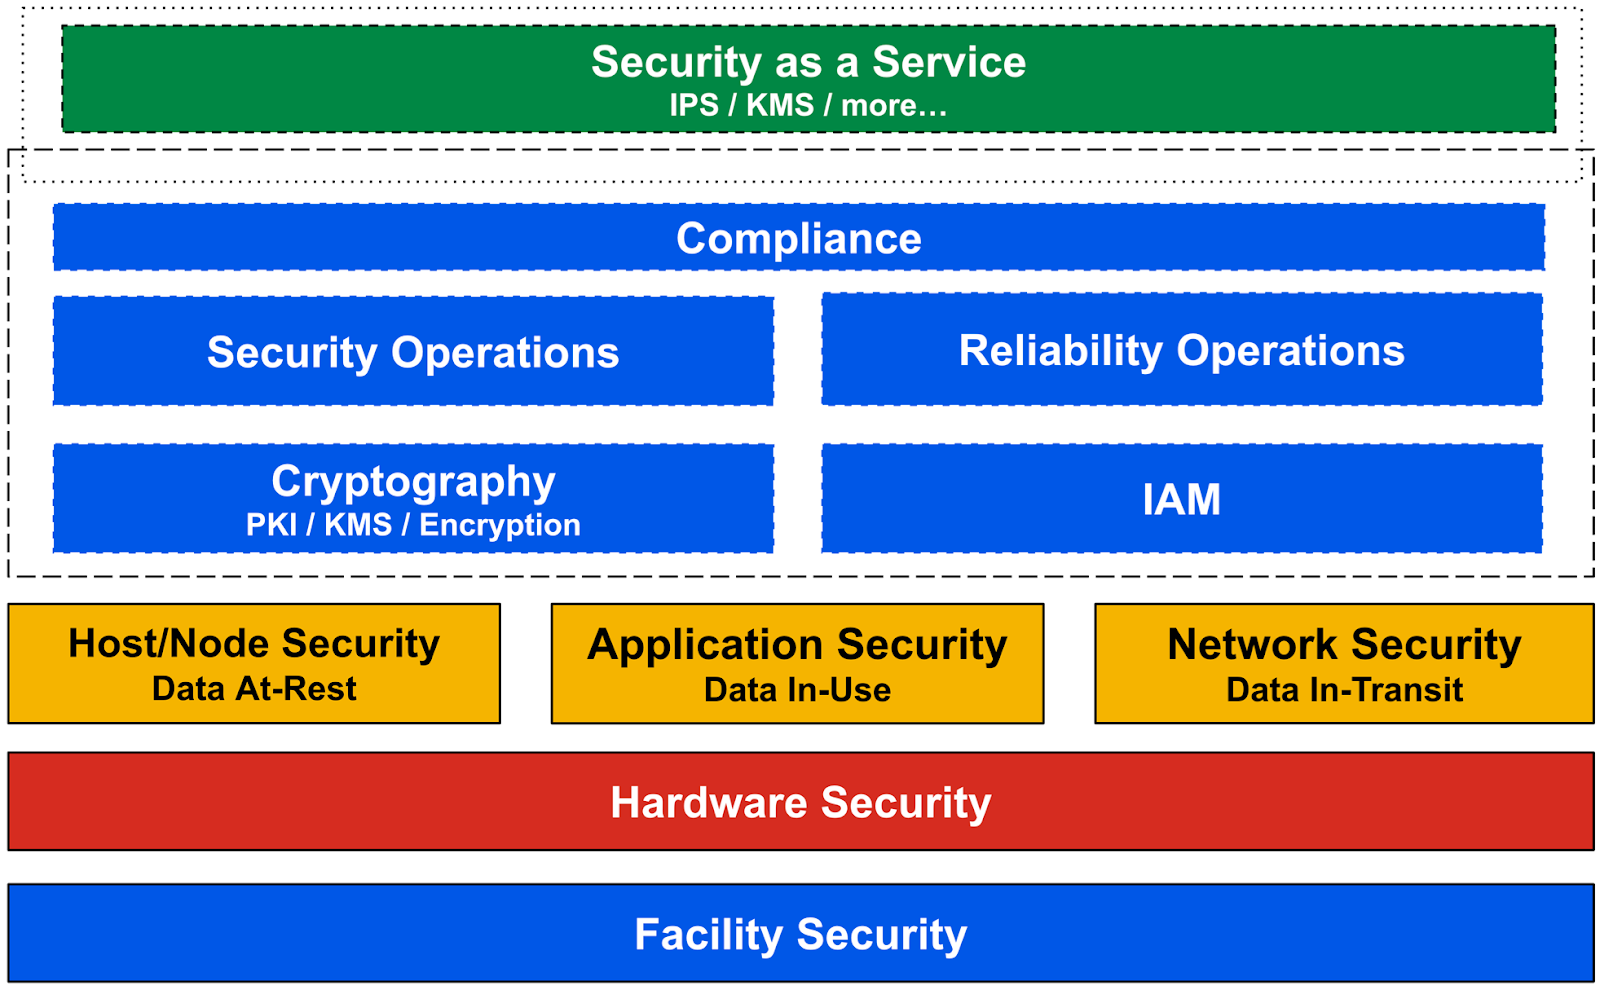 Components that make up GDCH security as a service, including compliance, hardware and facility.